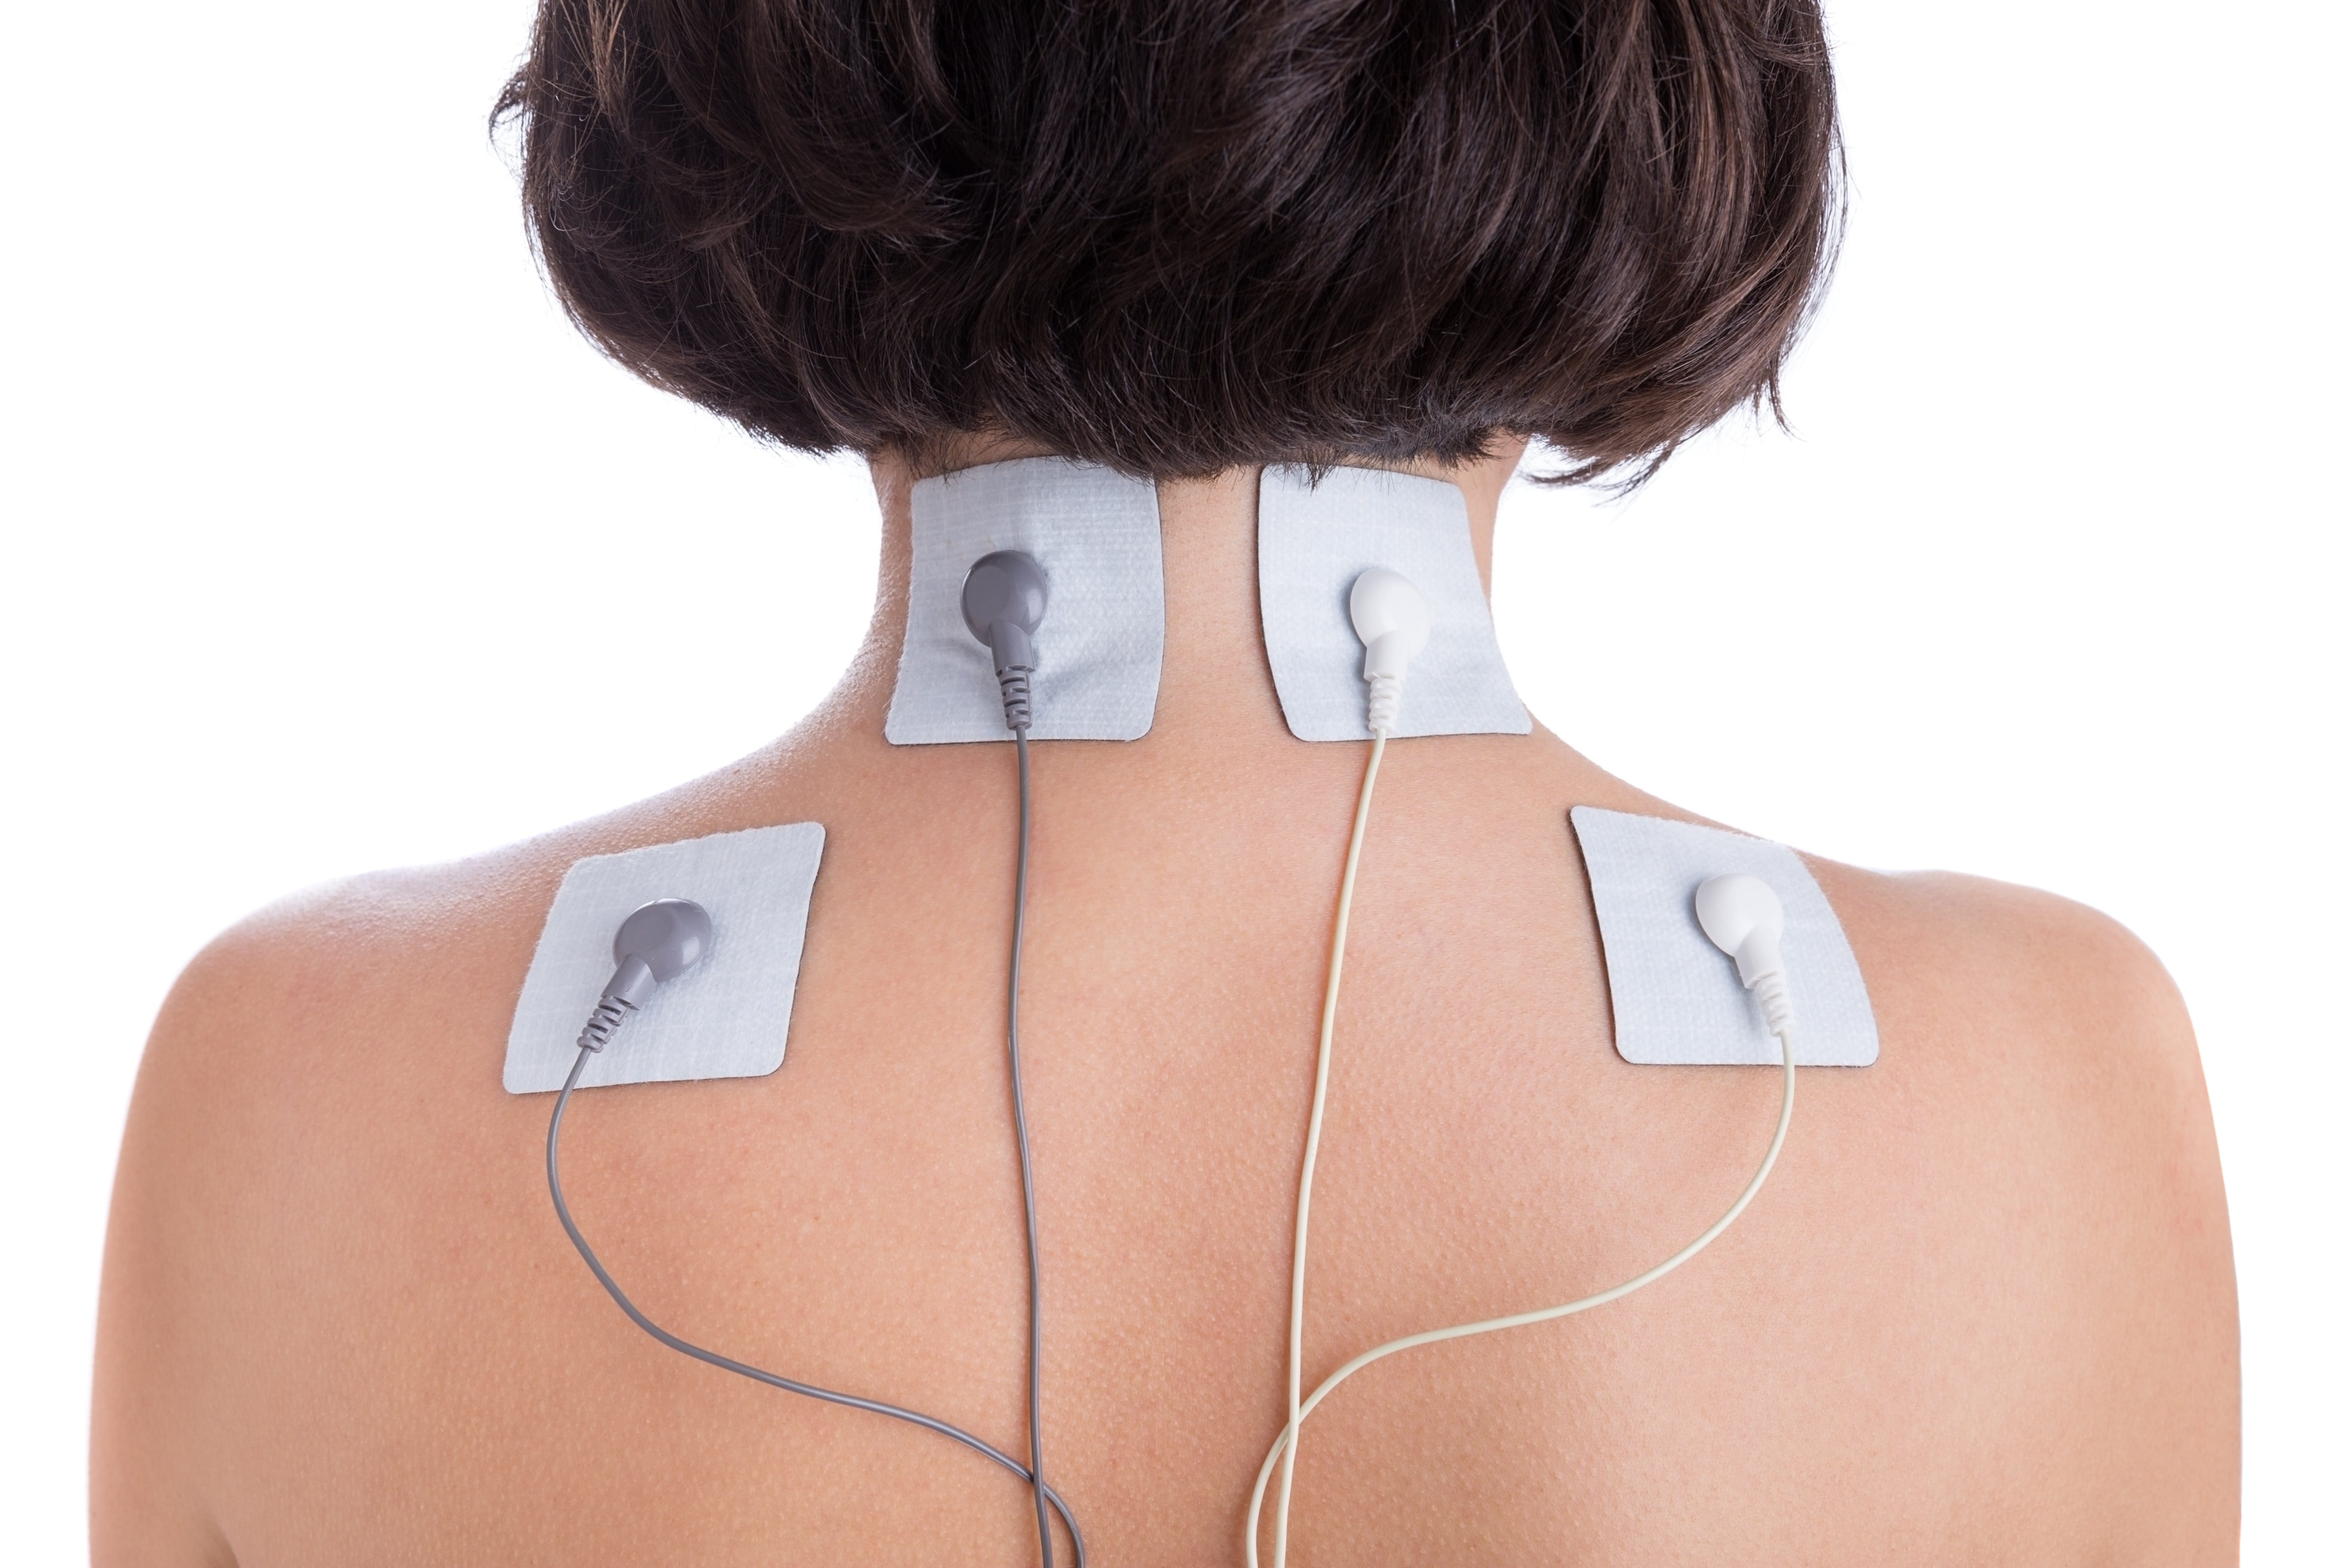 Interferential Electrical Stimulation